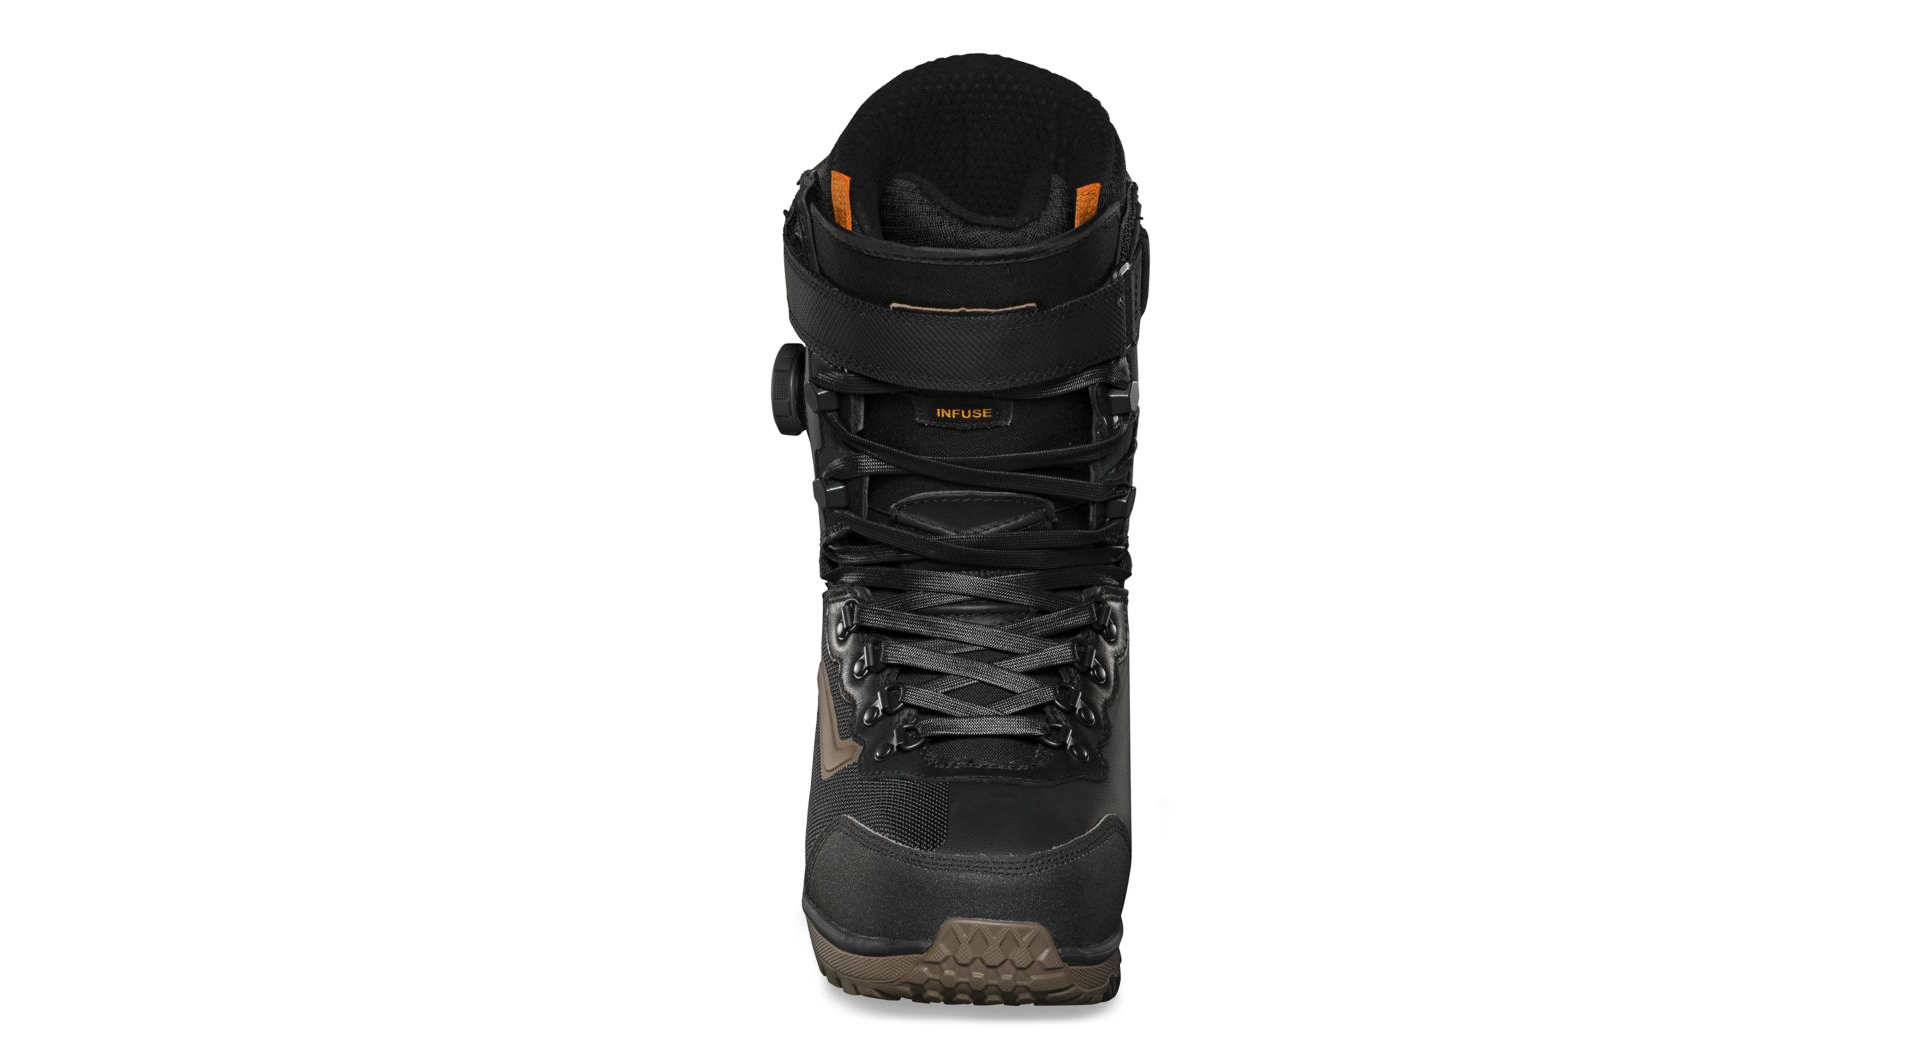 Vans Infuse snowboard boots black / canteen